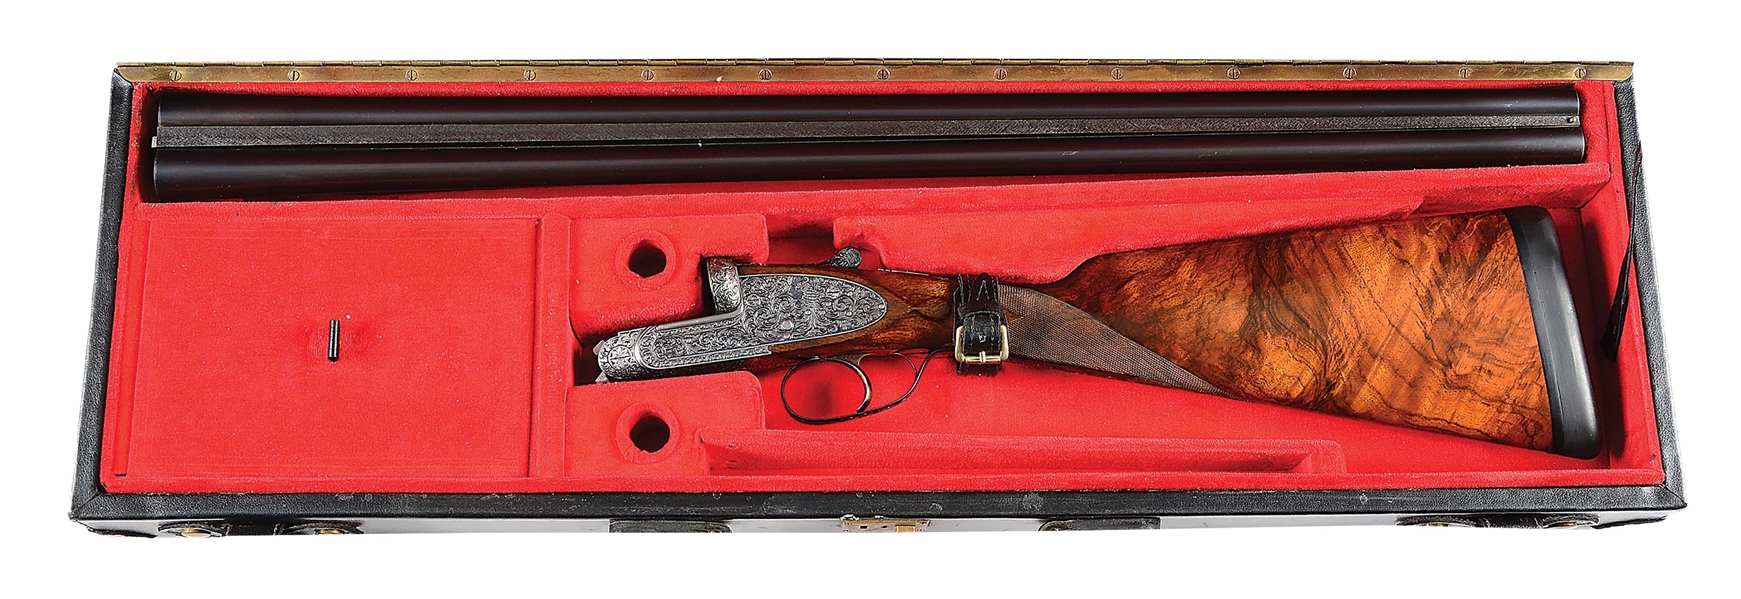 (M) SIDELOCK EJECTOR SINGLE TRIGGER GAME GUN MADE BY S. CORTESI FOR GIANOBERTO LUPI WITH SEMI-RELIEF SCROLL AND MYTHOLOGICAL MOTIF ENGRAVING AND CASE.